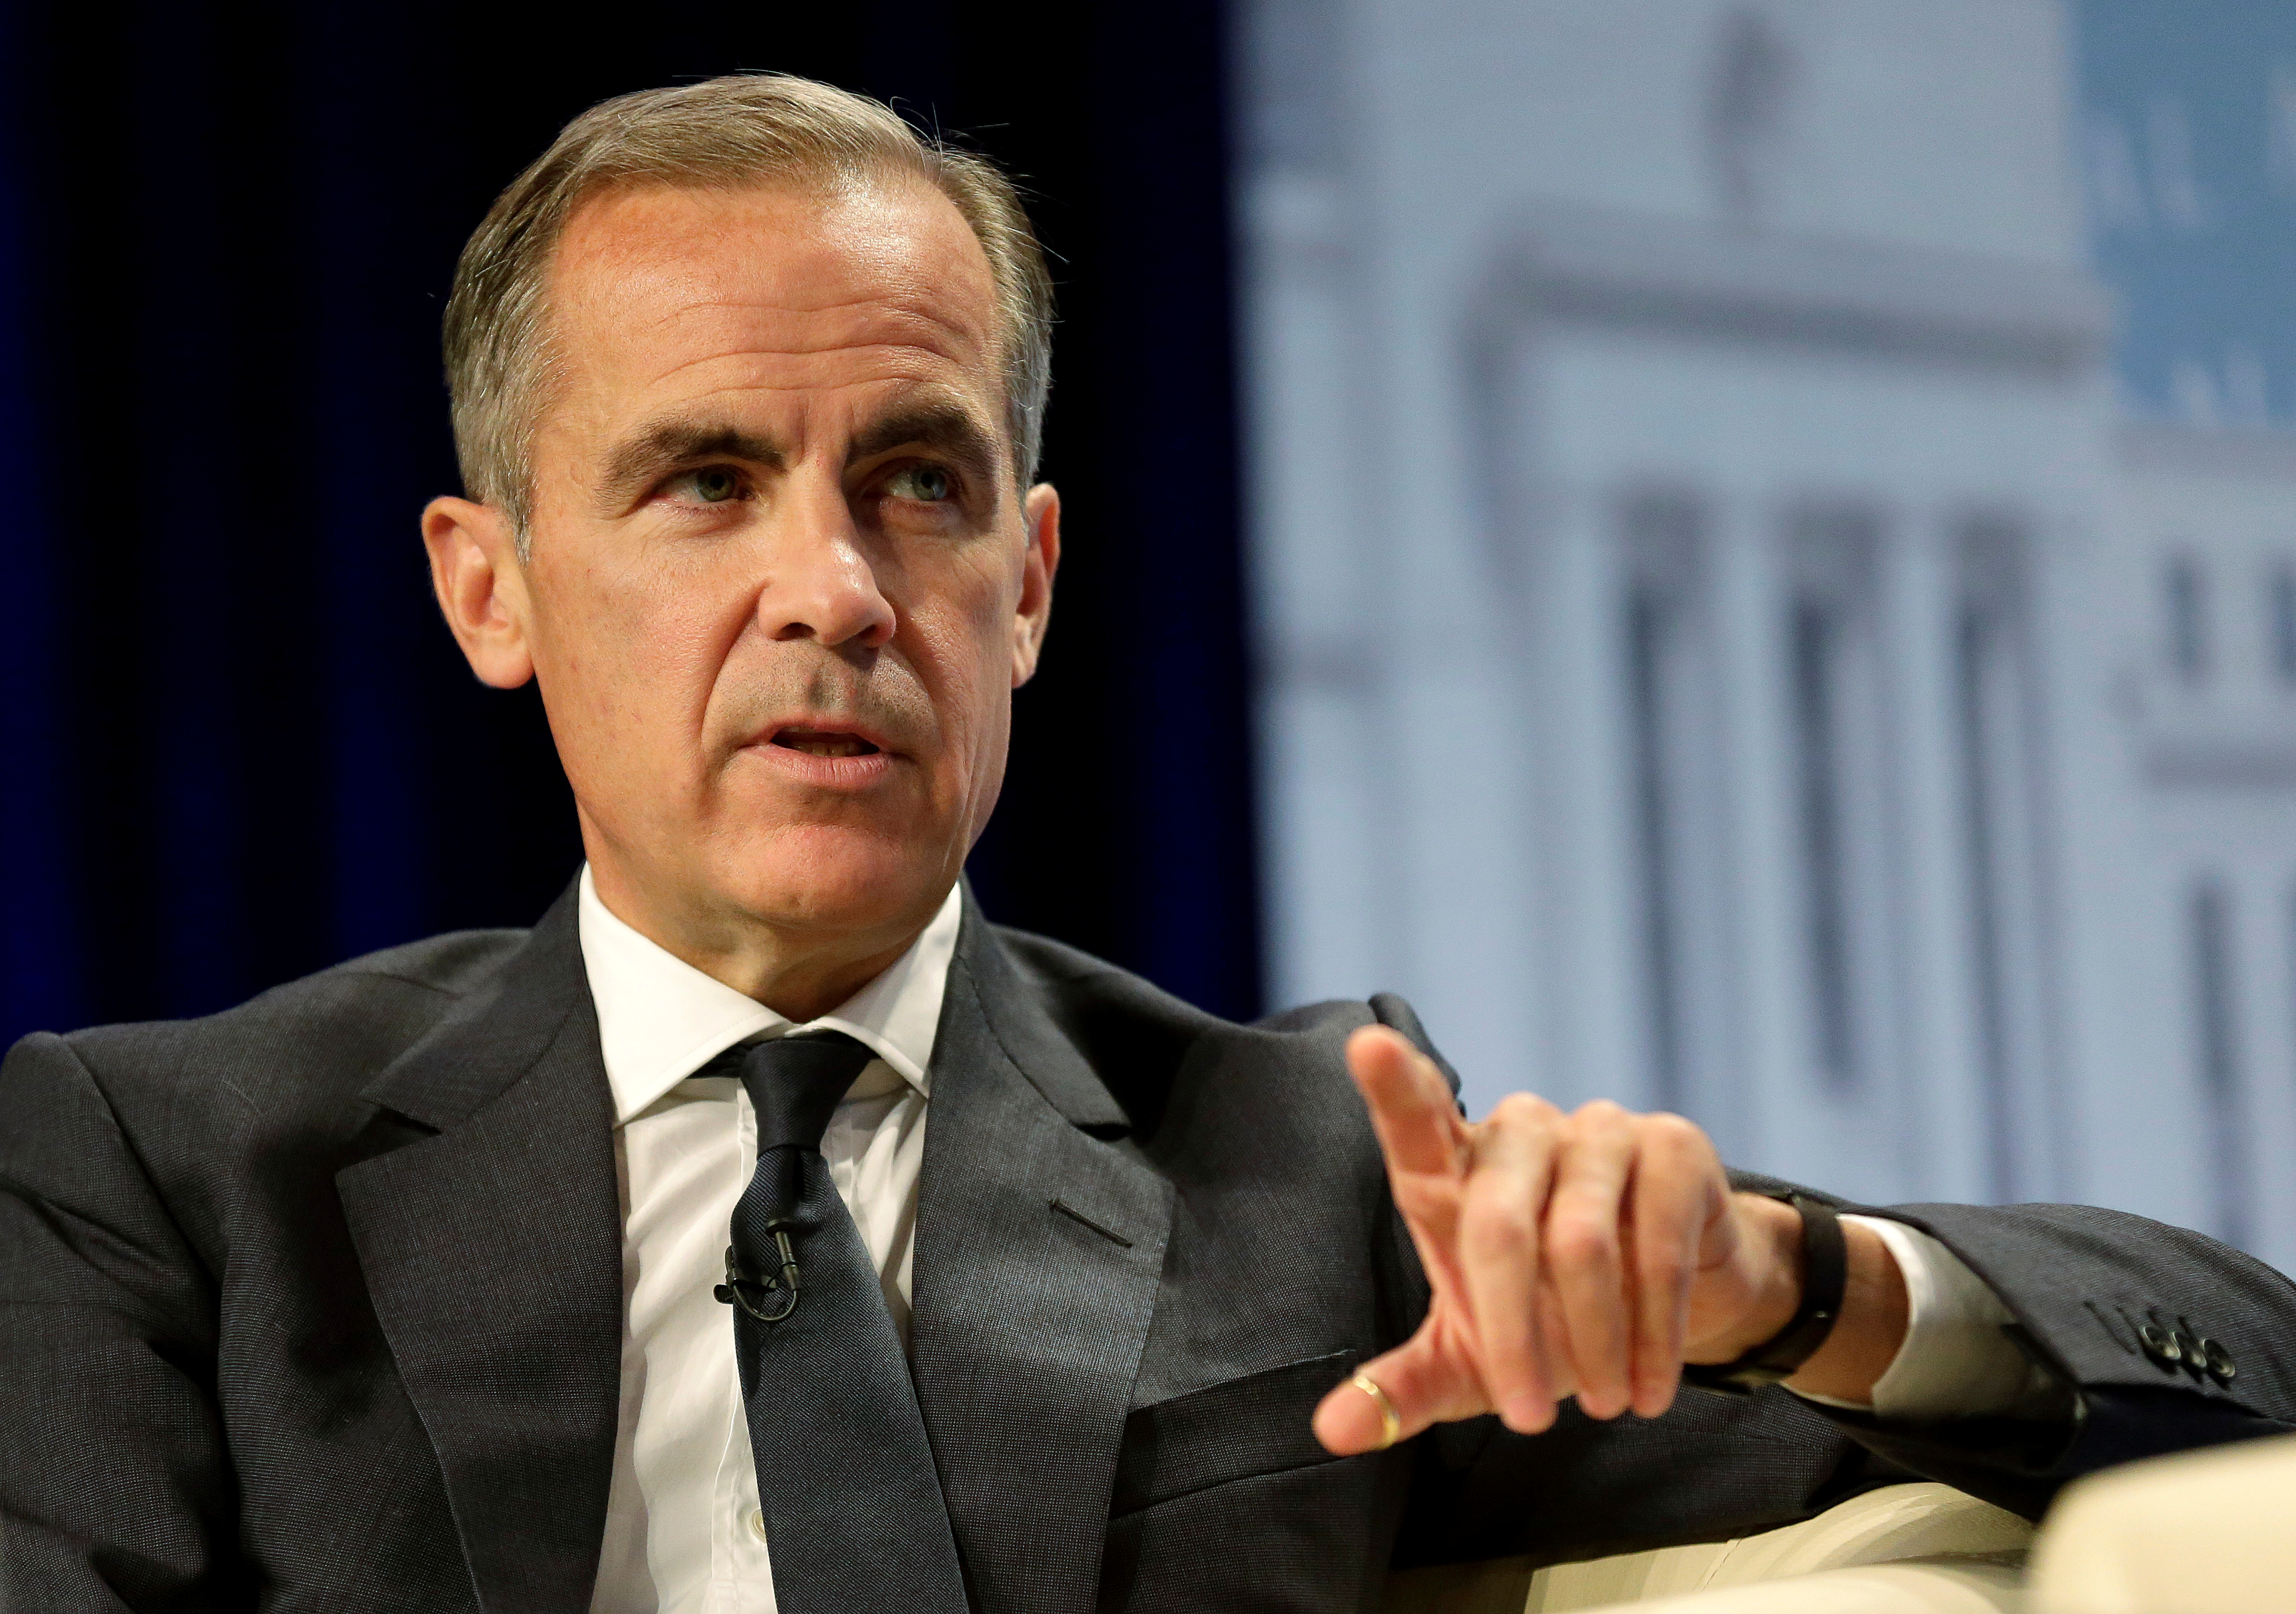 Governor of the Bank of England Mark Carney speaks after delivering the Michel Camdessus Central Banking Lecture at the International Monetary Fund in Washington